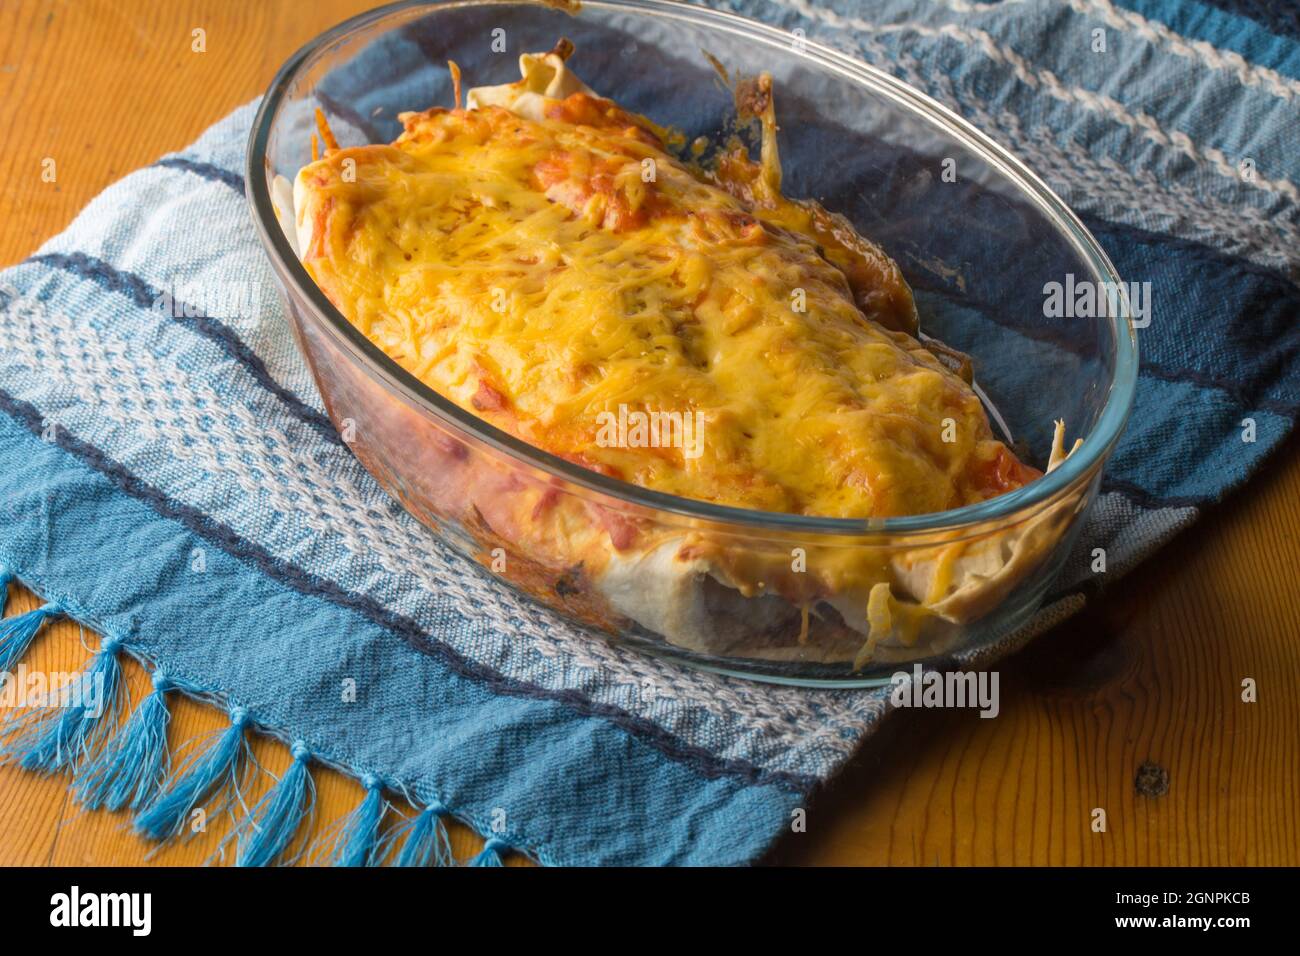 Close up of dinner in casserole dish with Chicken enchiladas garnished with enchilada sauce and cheese Stock Photo